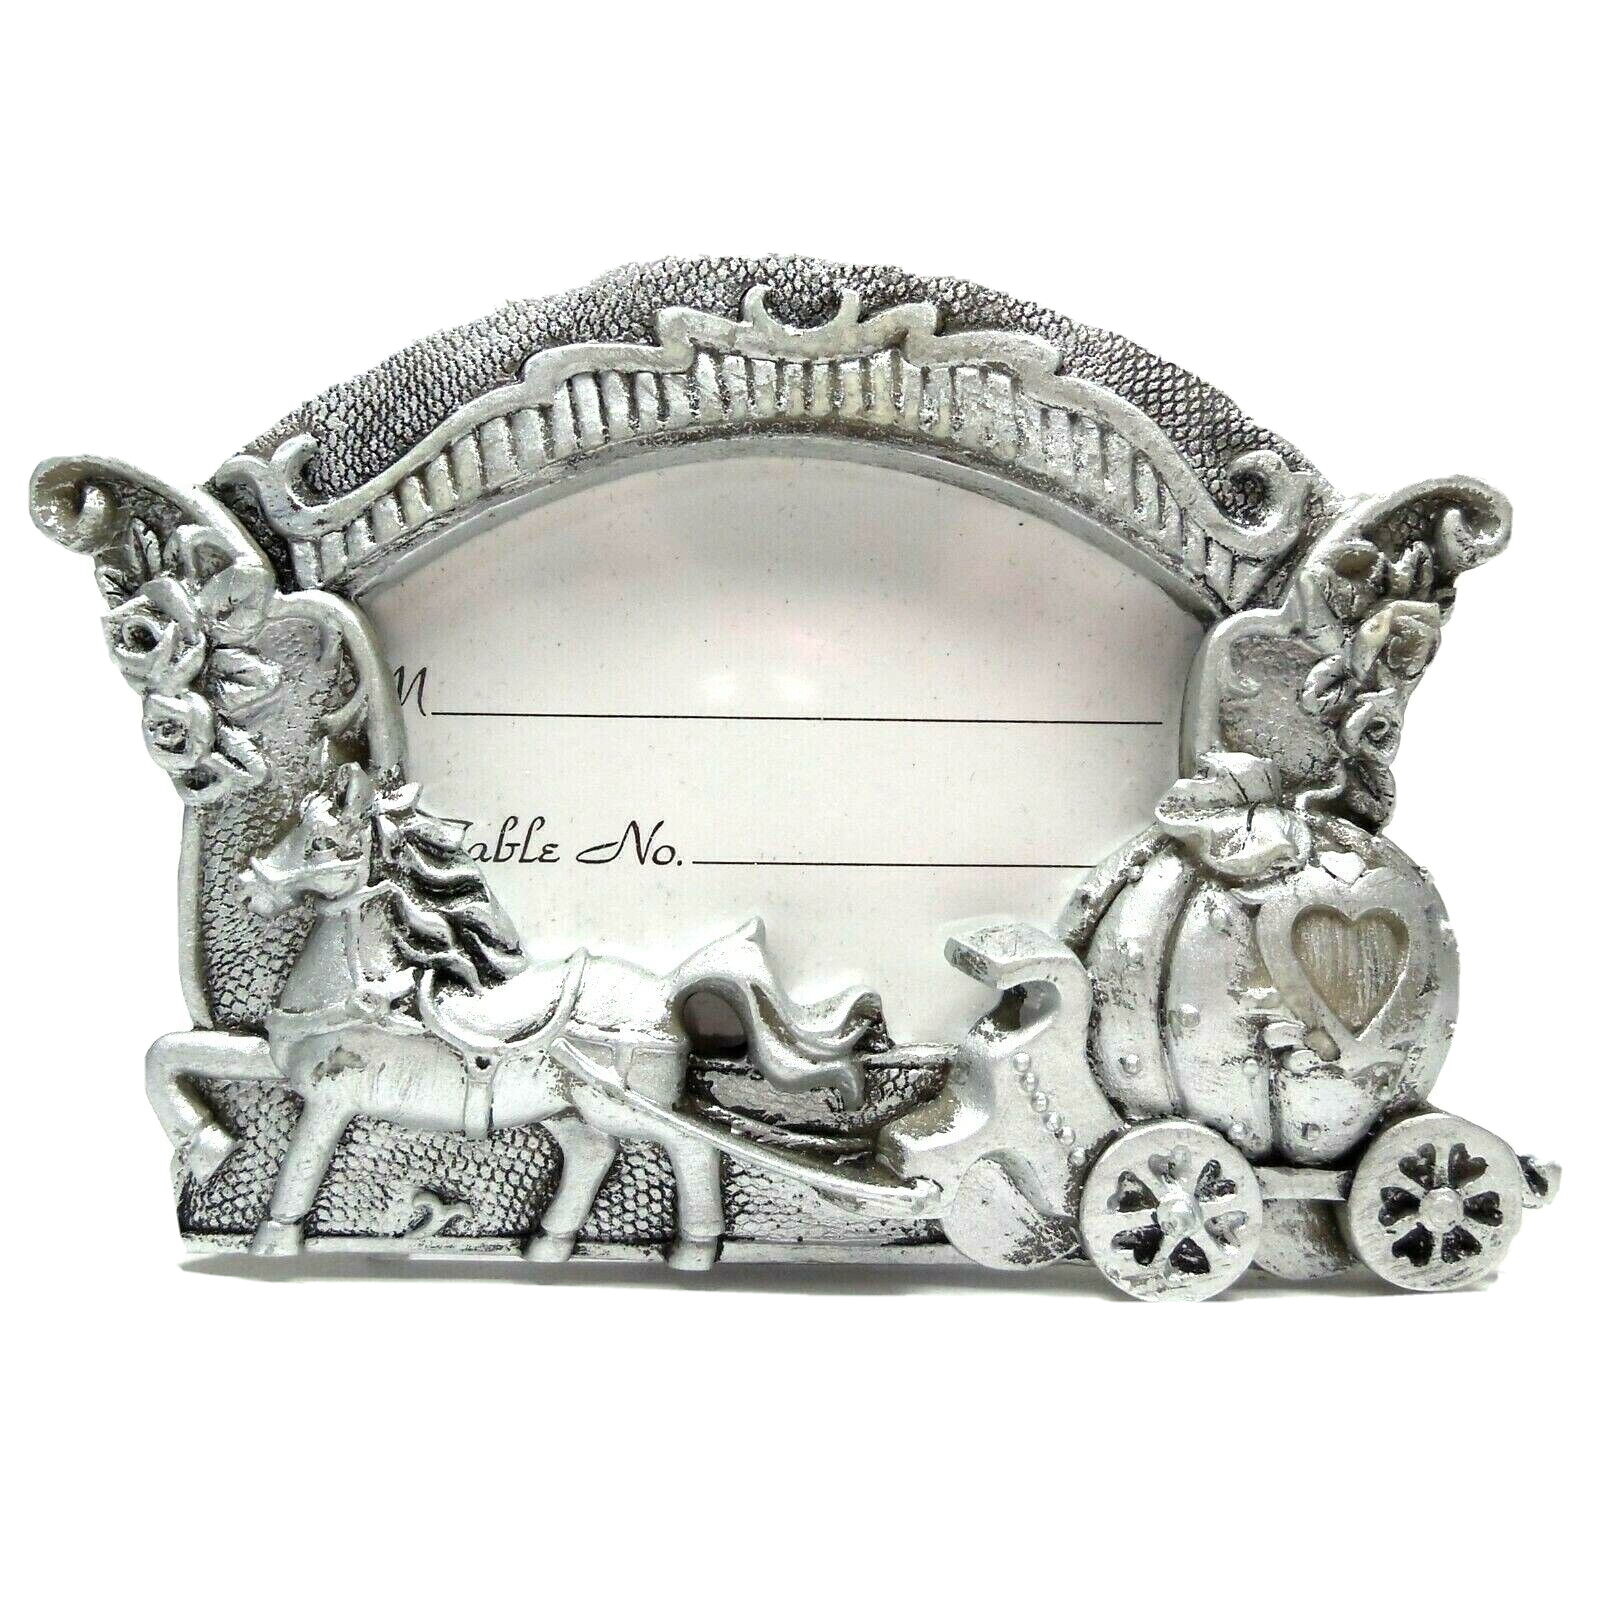 Primary image for Wedding Place Card Holder (27 pieces) Horse Pumpkin Carriage Silver Photo Frame